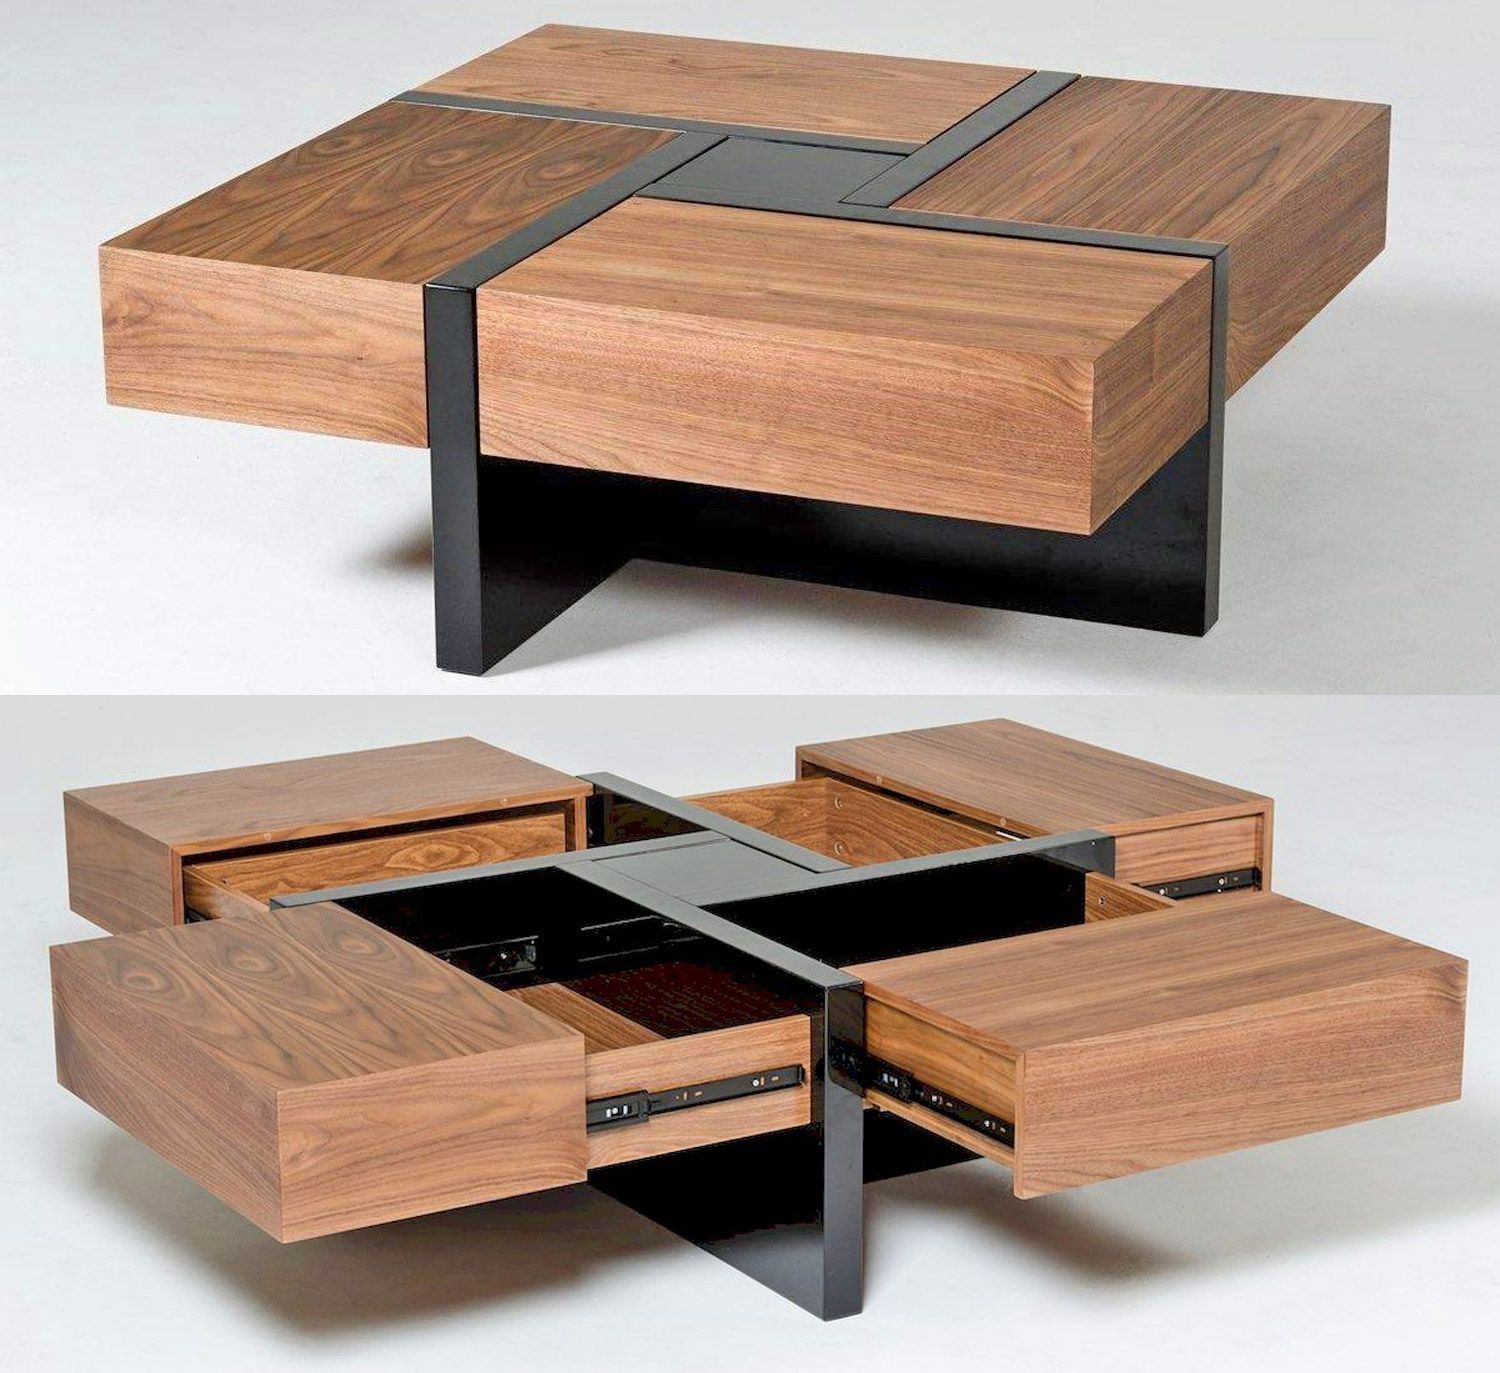 10+ Stylish Modern Wooden Coffee Table Designs – Decoomo Regarding Simple Design Coffee Tables (View 15 of 15)